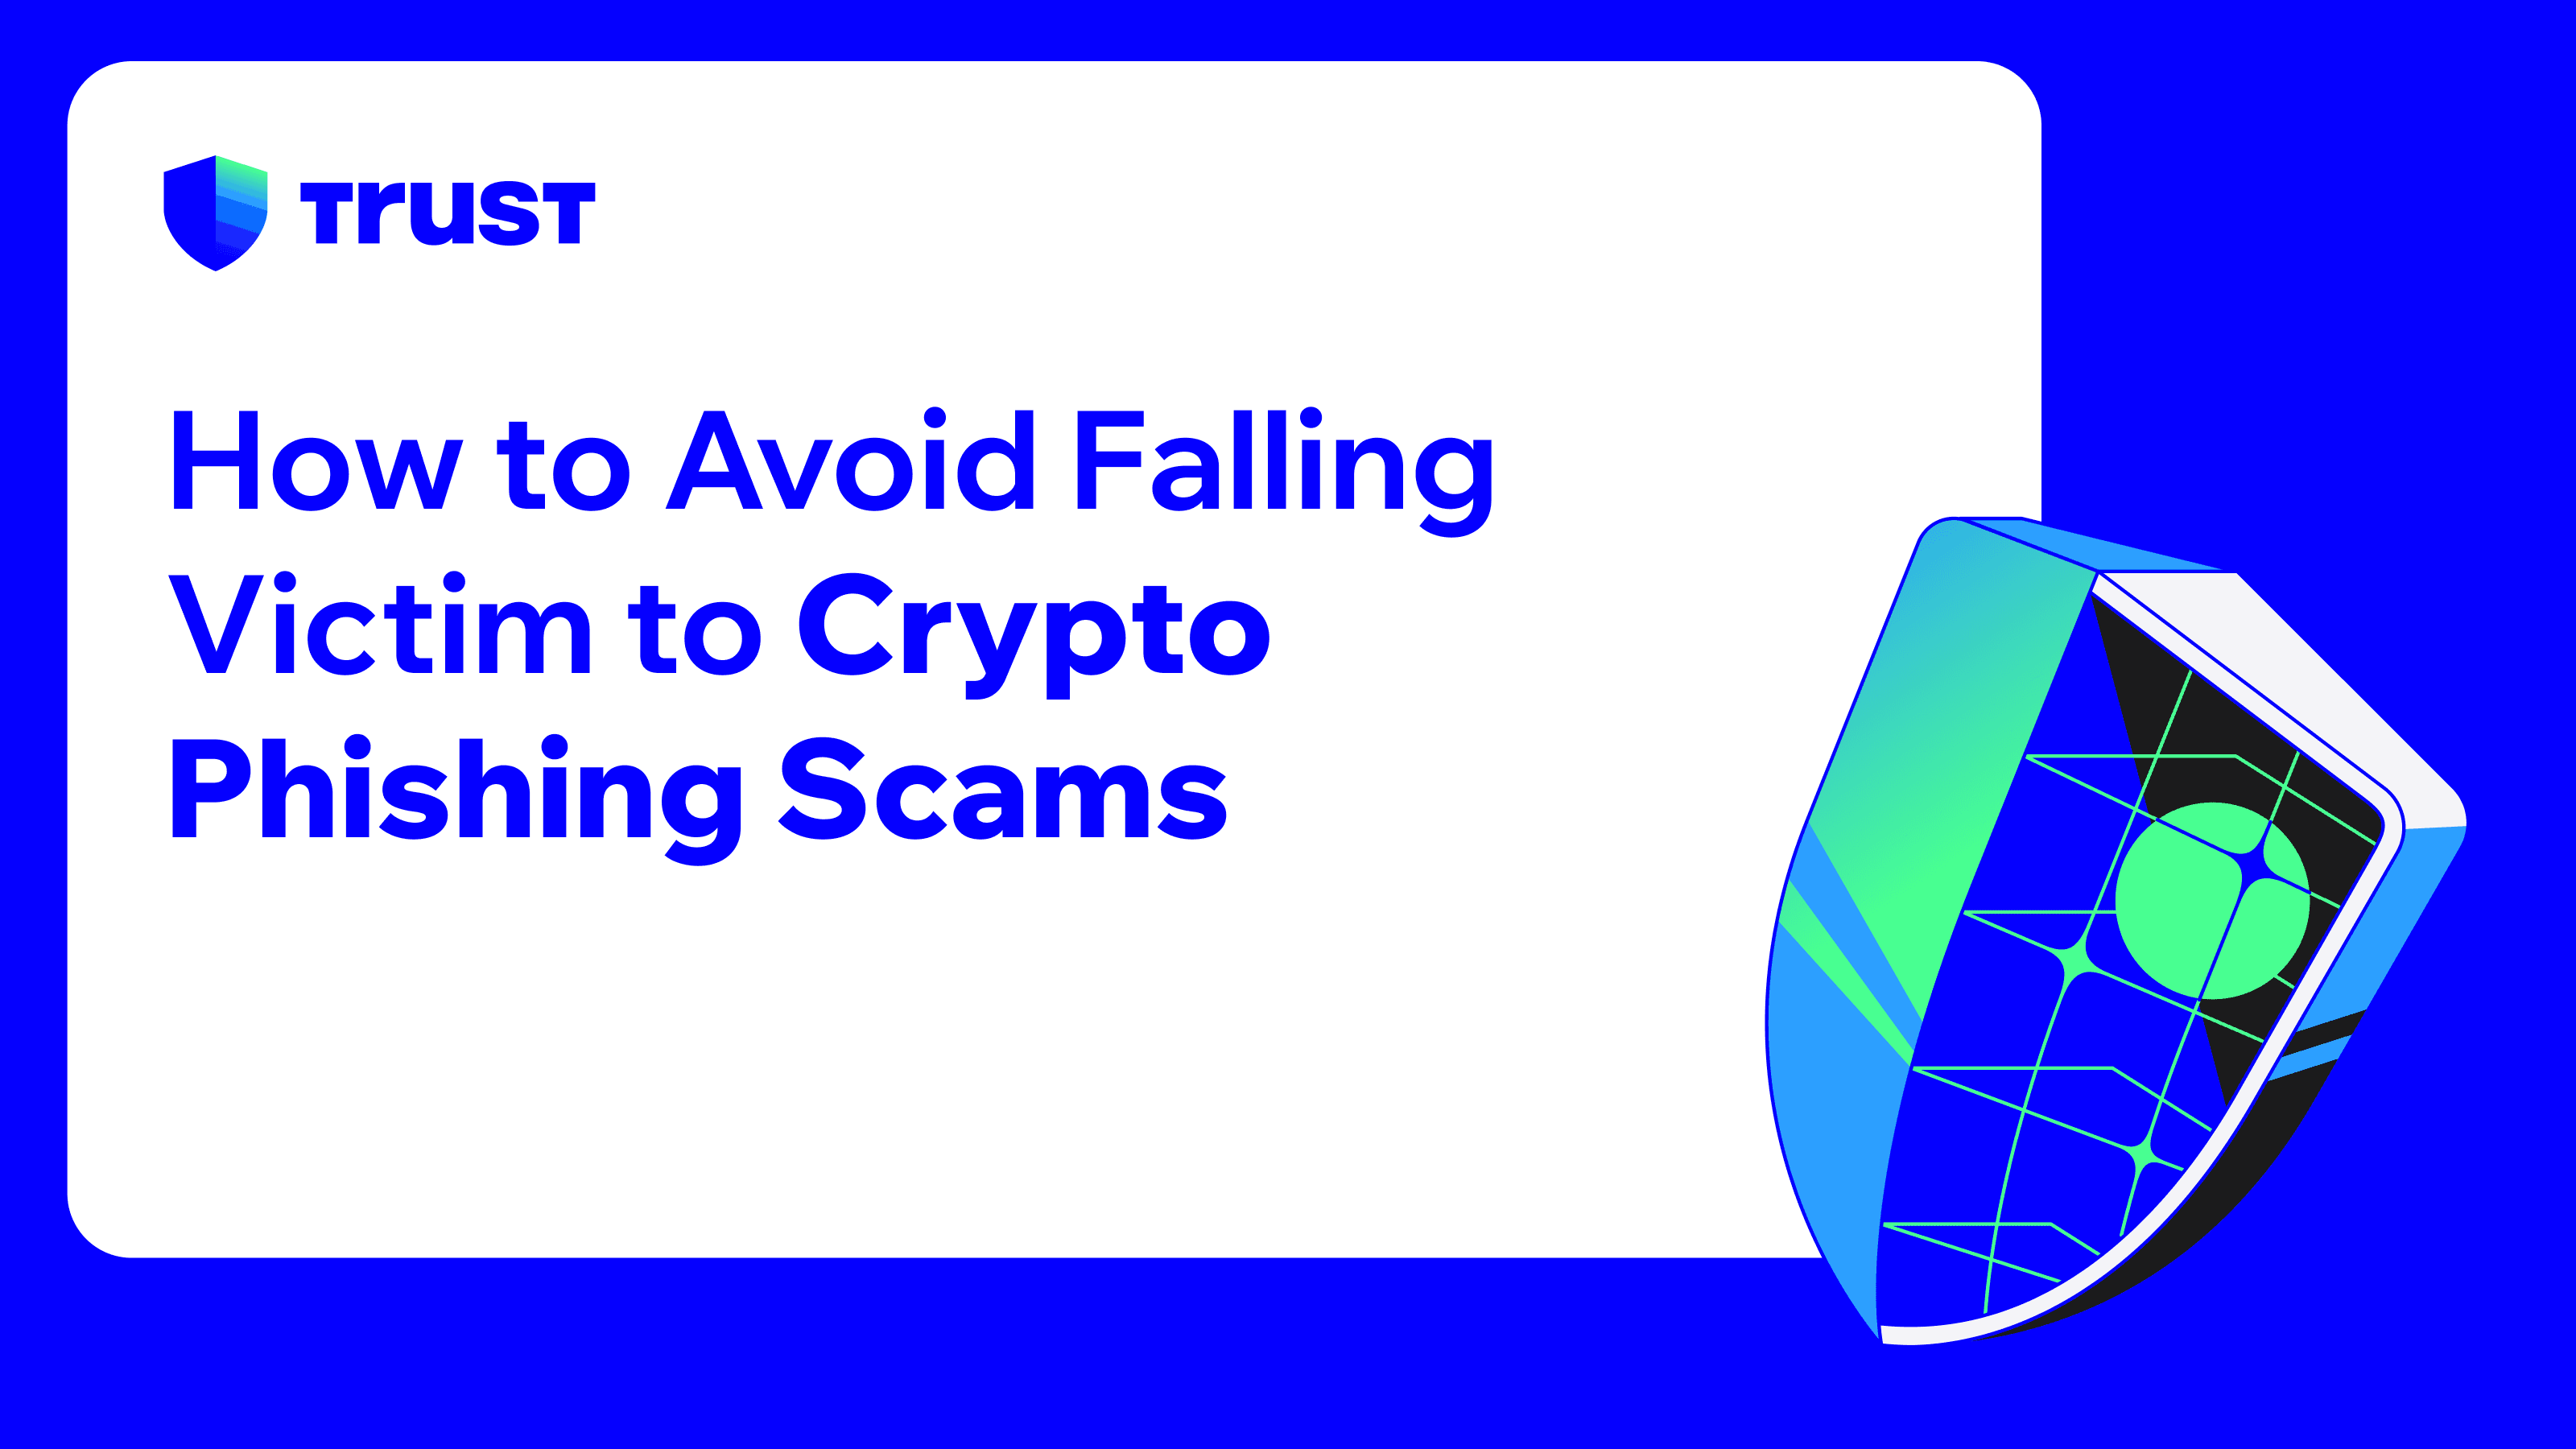 How to Avoid Falling Victim to Crypto Phishing Scams